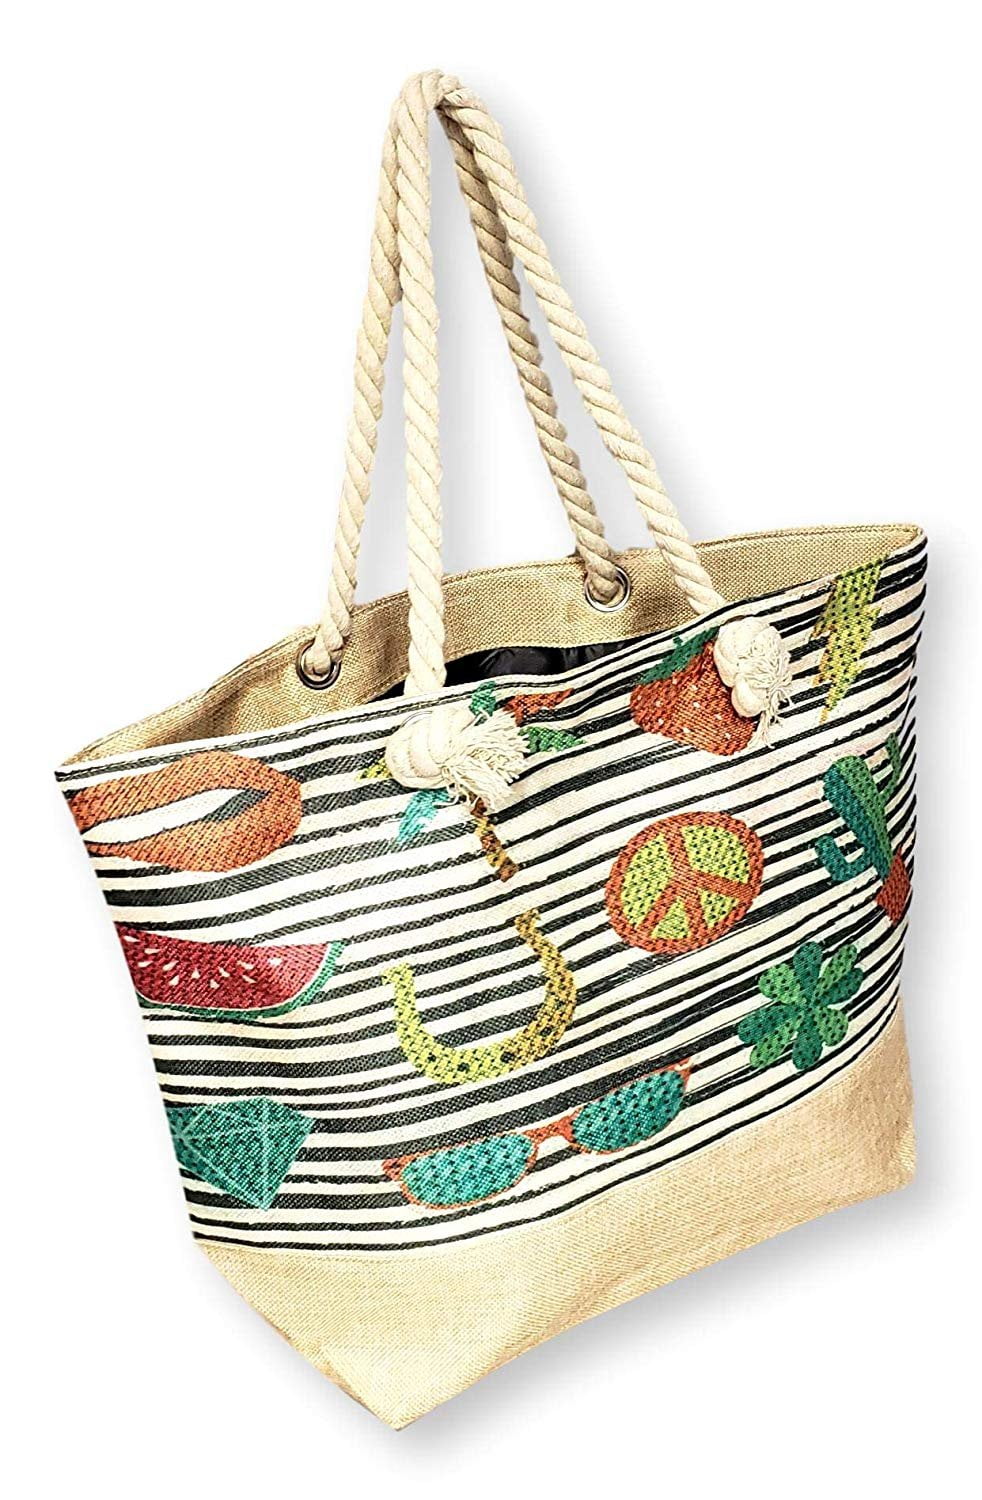 Xl Grocery Tote Bags Summer Exotic Floral Tropical Palm Leaves Leather Hand Totes Bag Causal Handbags Zipped Shoulder Organizer For Lady Girls Womens Tote For Women